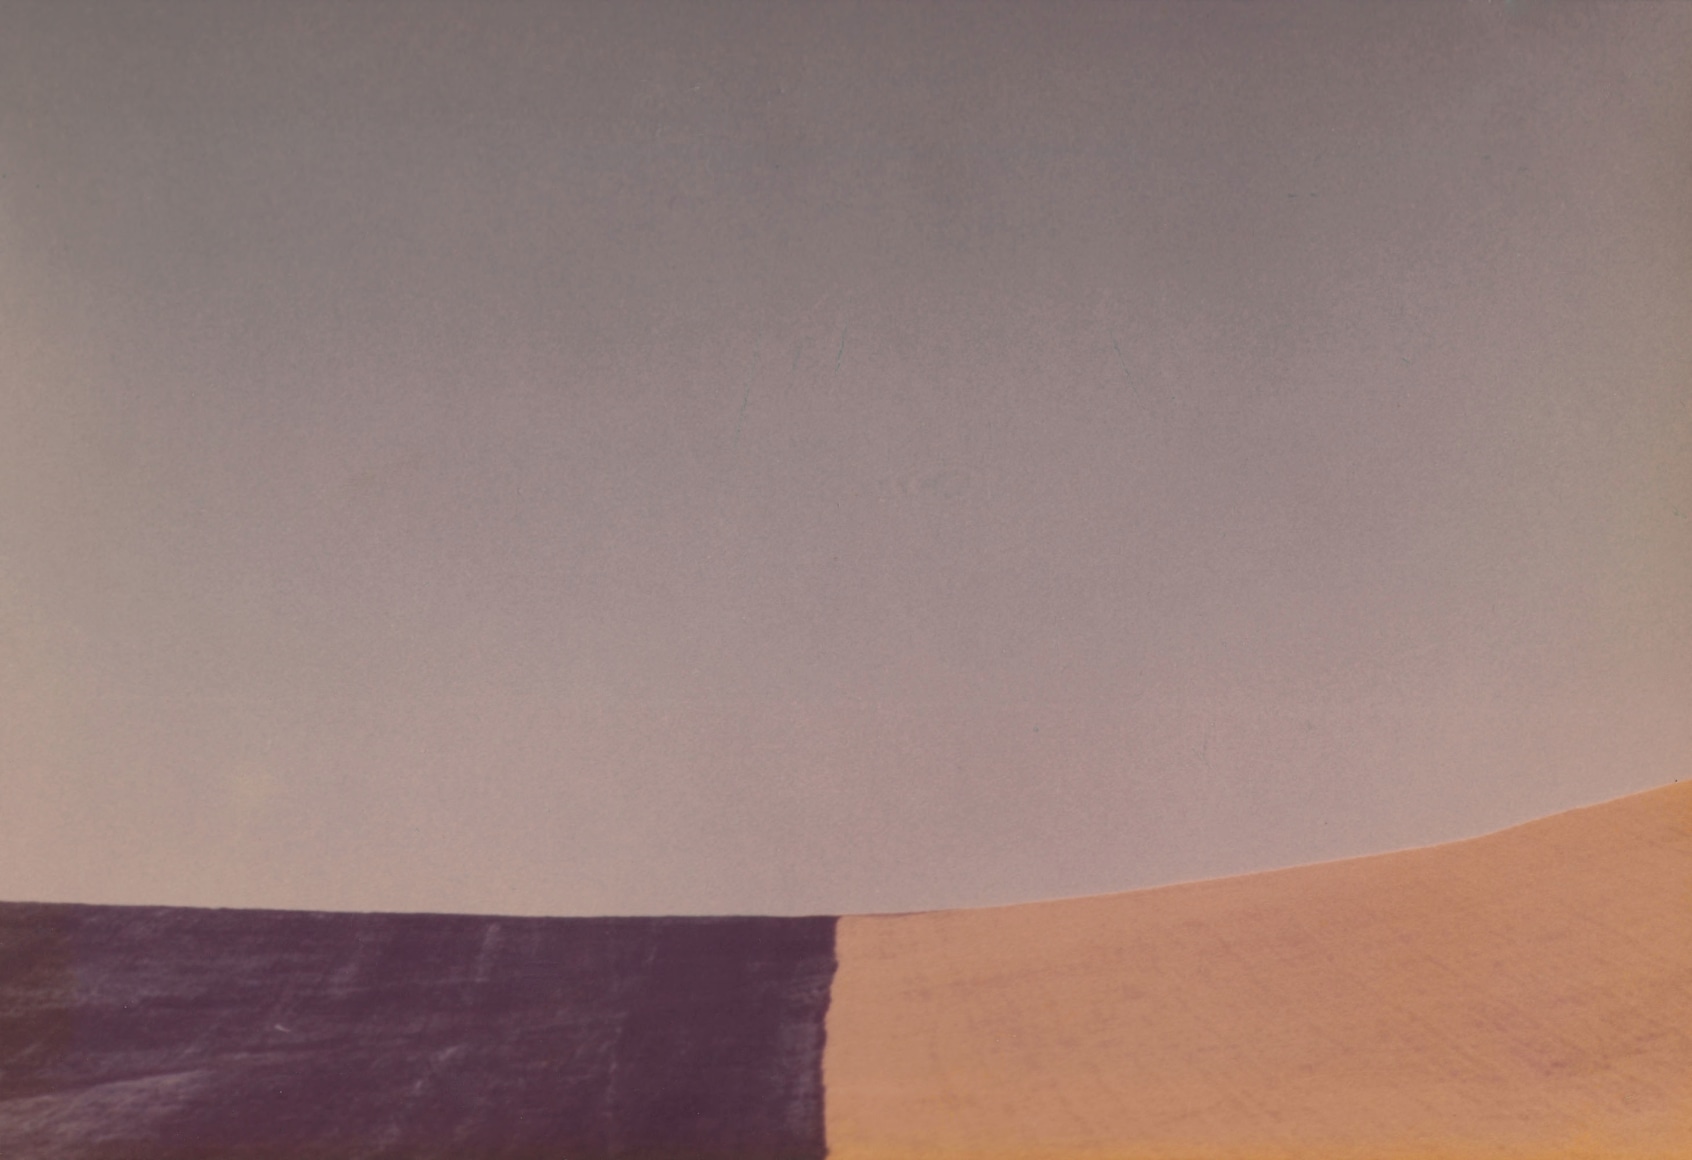 Franco Fontana, Untitled, ​1975. Abstracted color scene divided into three rectangles: the largest, a grayish purple, fills the majority of the frame, while the lower third is divided into two color fields of deep purple and yellow.